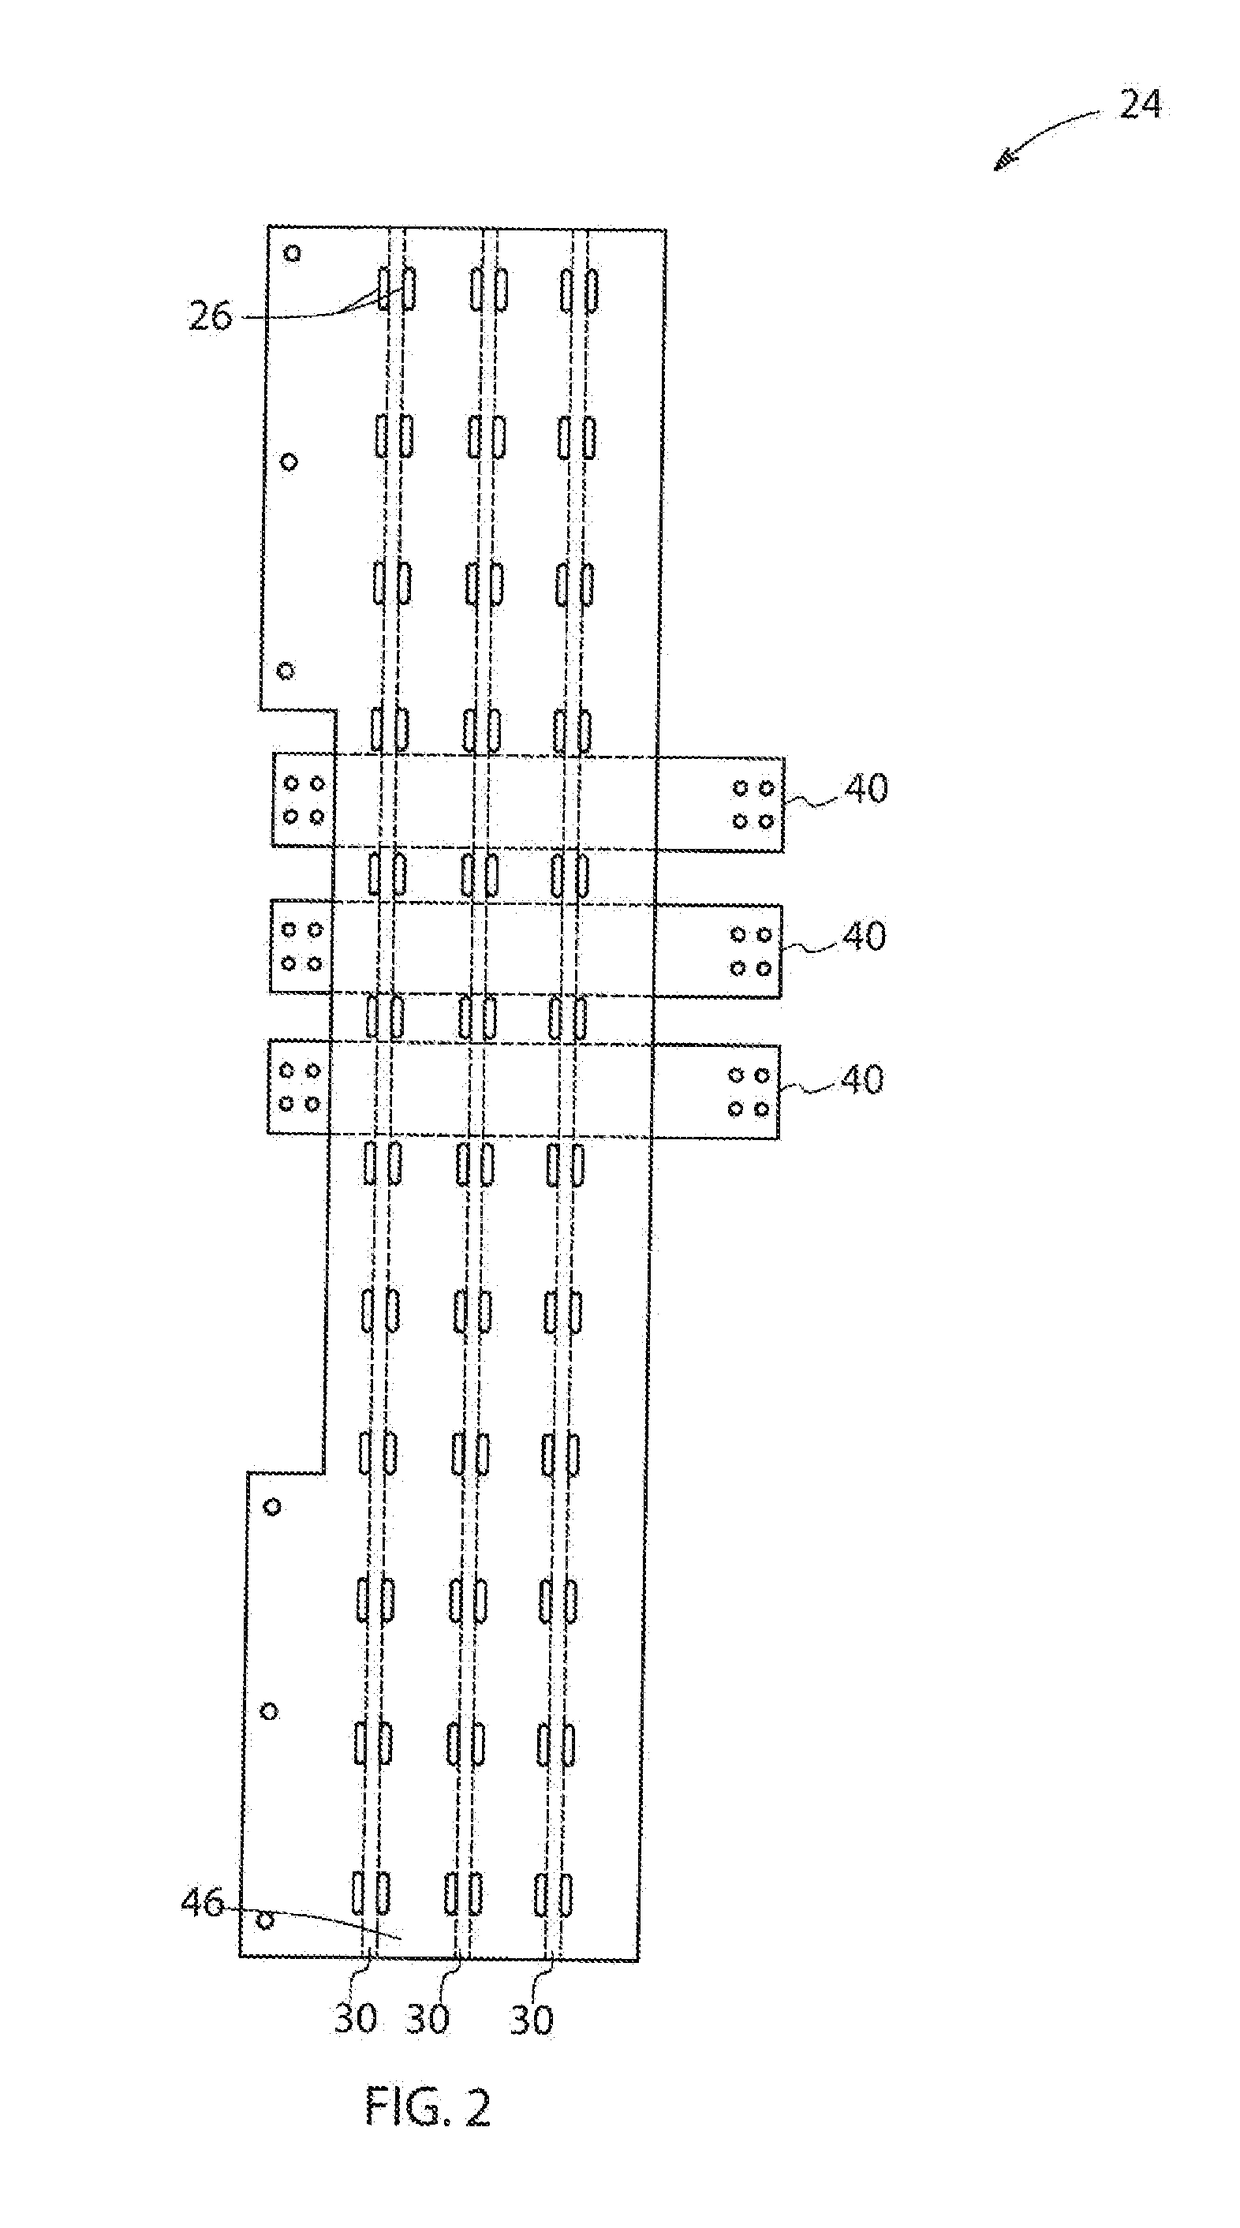 System for Isolating Power Conductors Using Molded Assemblies